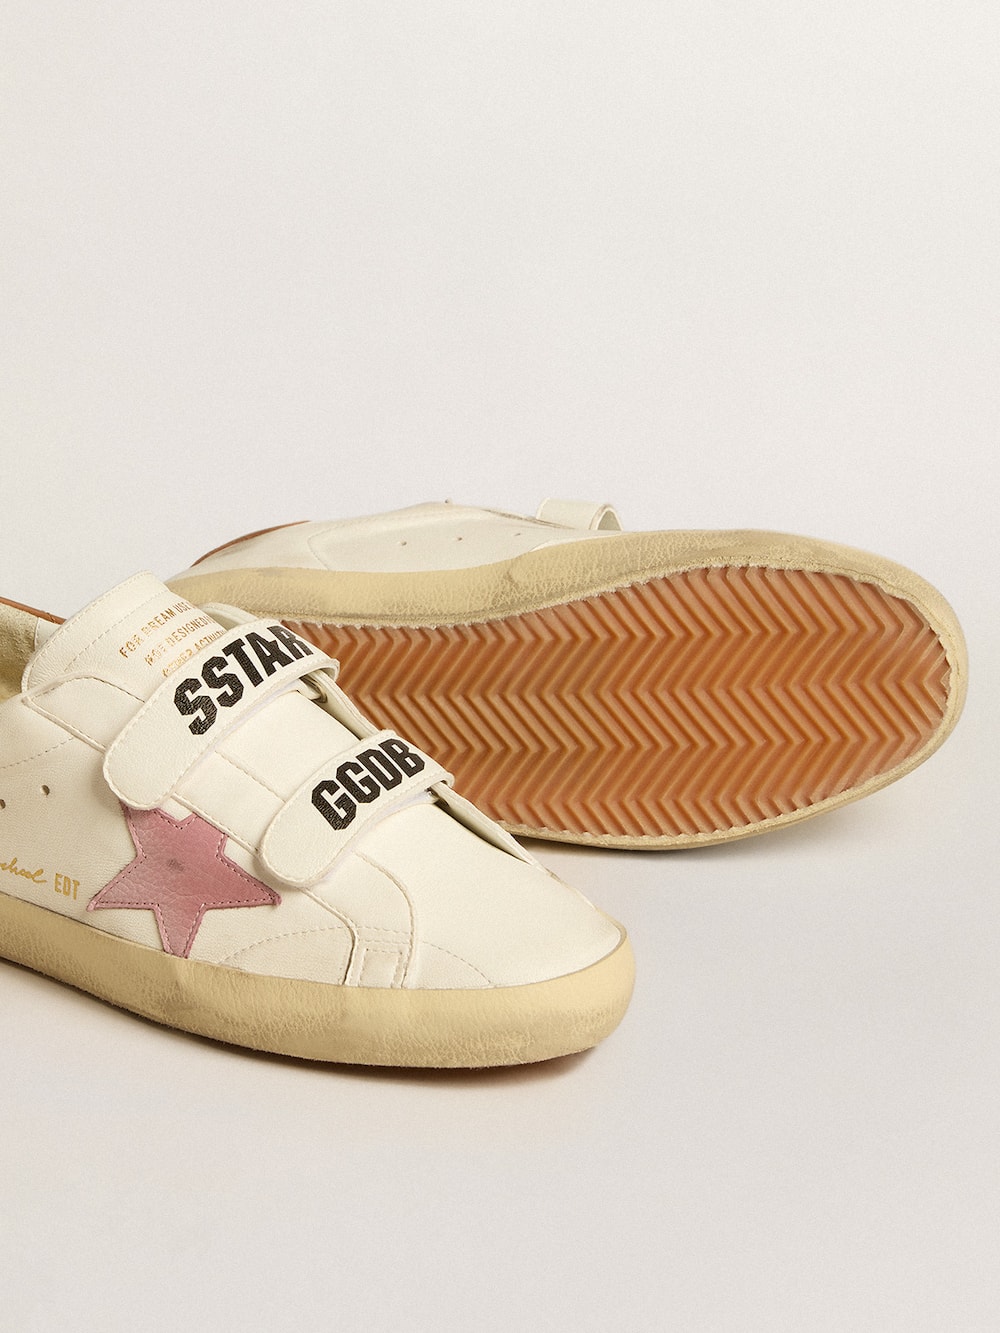 Golden Goose - Old School in nappa leather with pink leather star and beige shearling lining in 